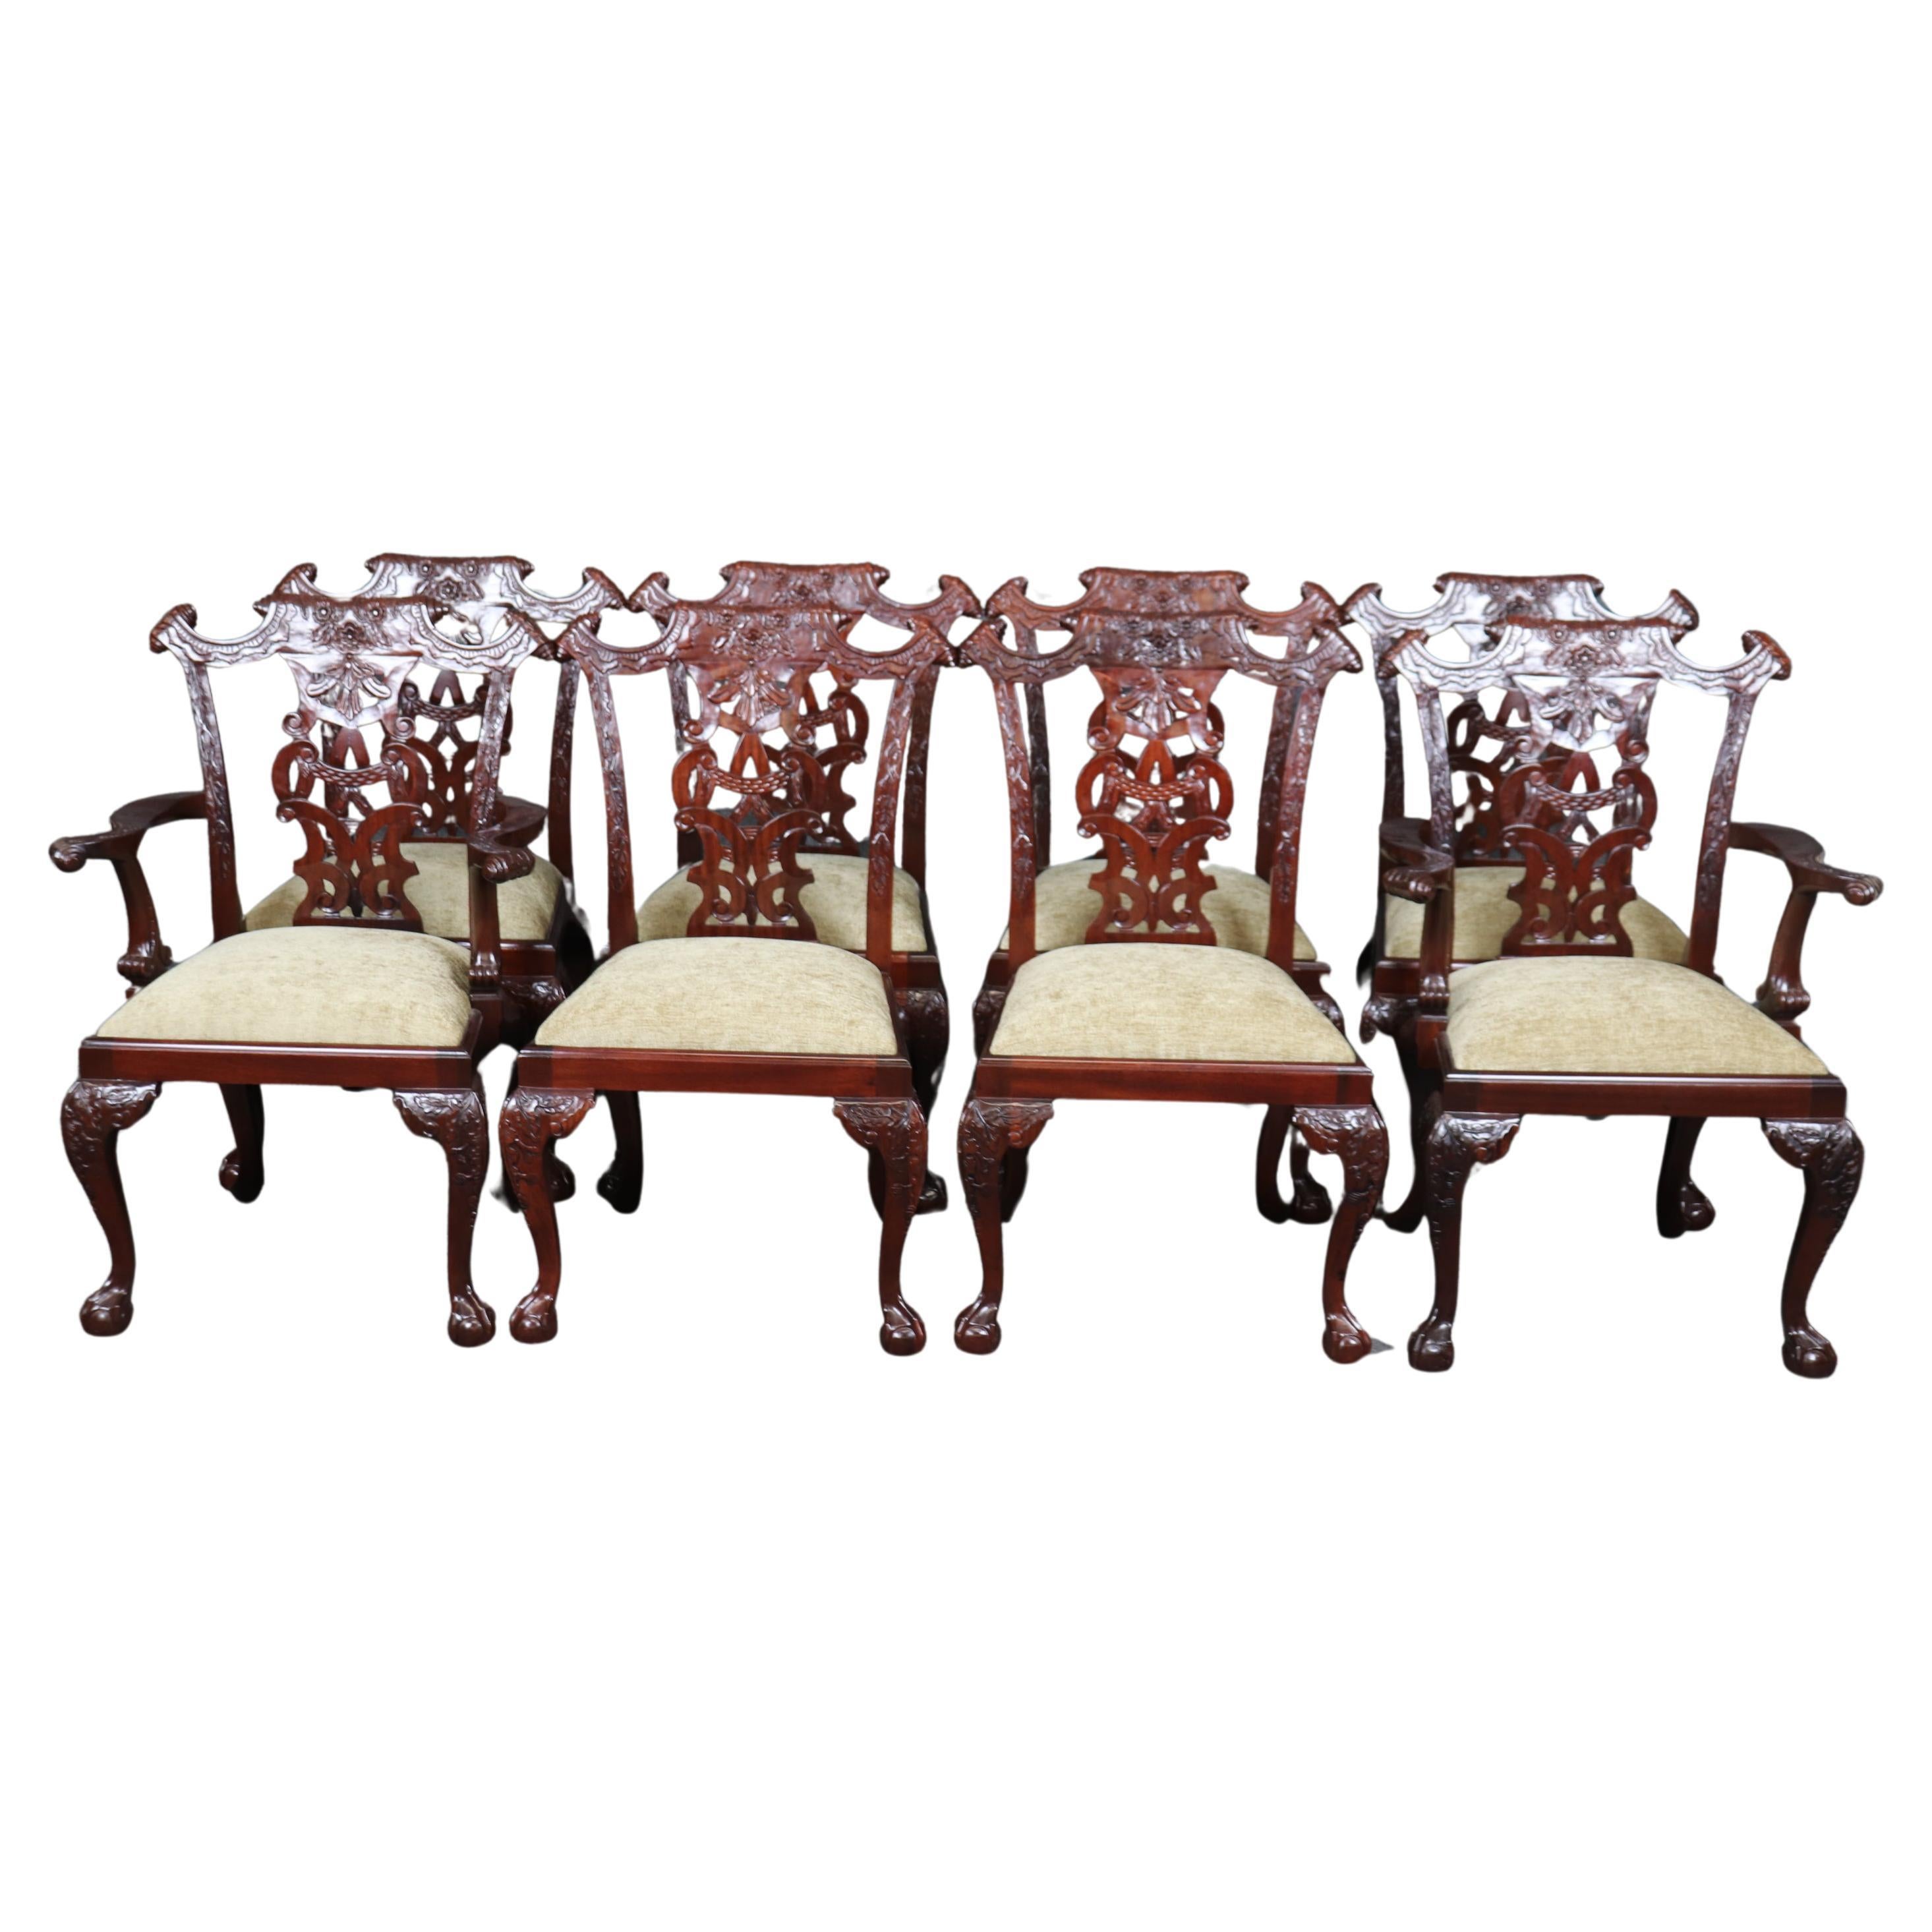 Set of 8 Spectacular Solid Mahogany Elaborately Carved Chippendale Dining Chairs